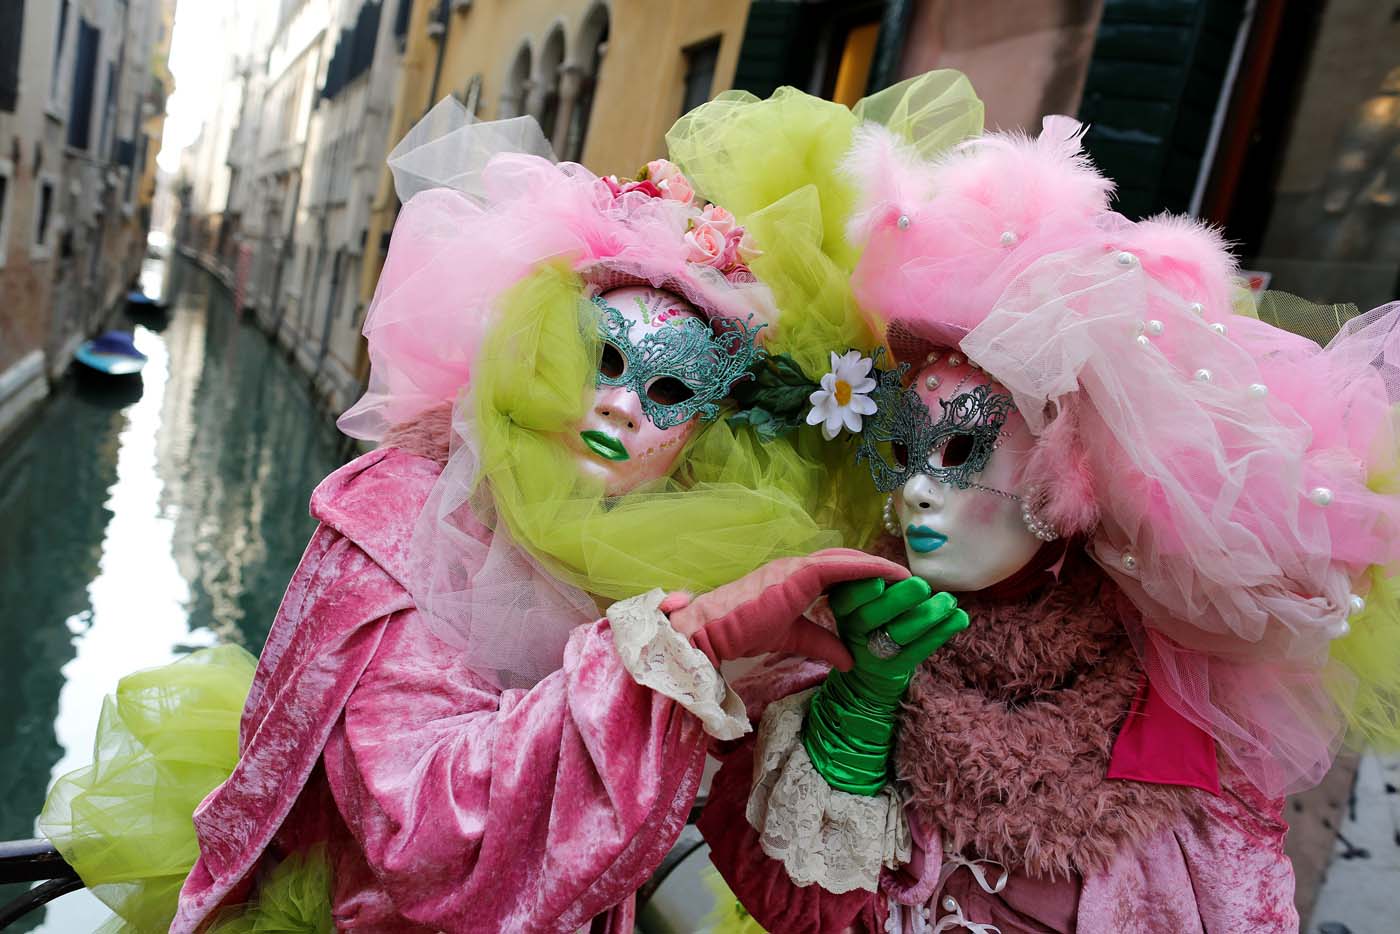 Masked revellers pose during the Venice Carnival in Venice, Italy February 12, 2017. REUTERS/Tony Gentile